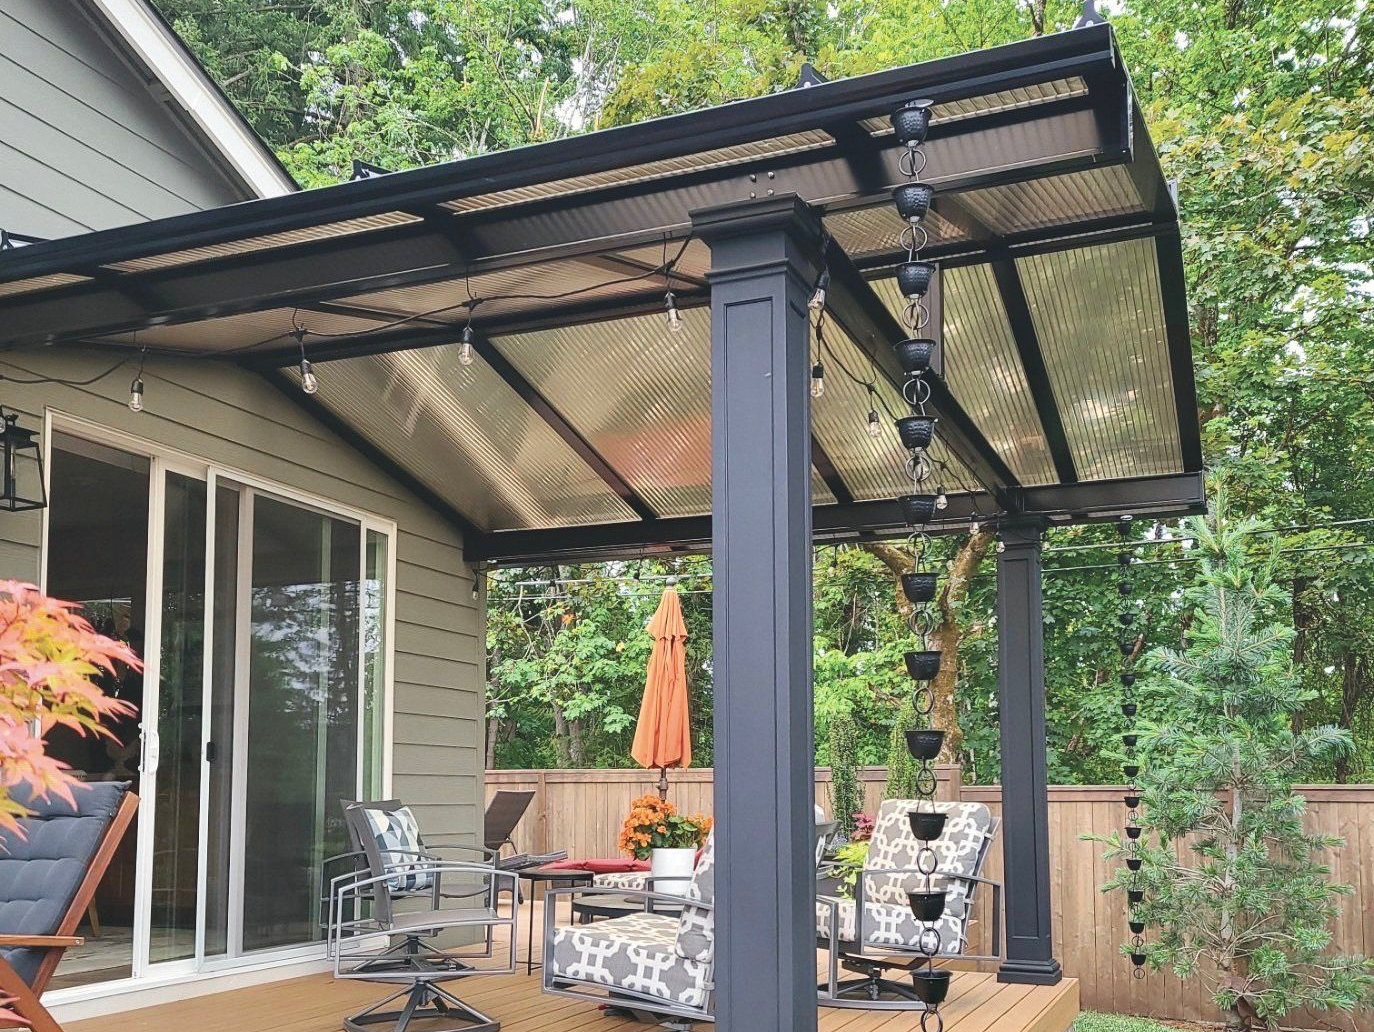 Patio Covers in Hillsboro Oregon - Gable Roof with ACRYLITE Acrylic